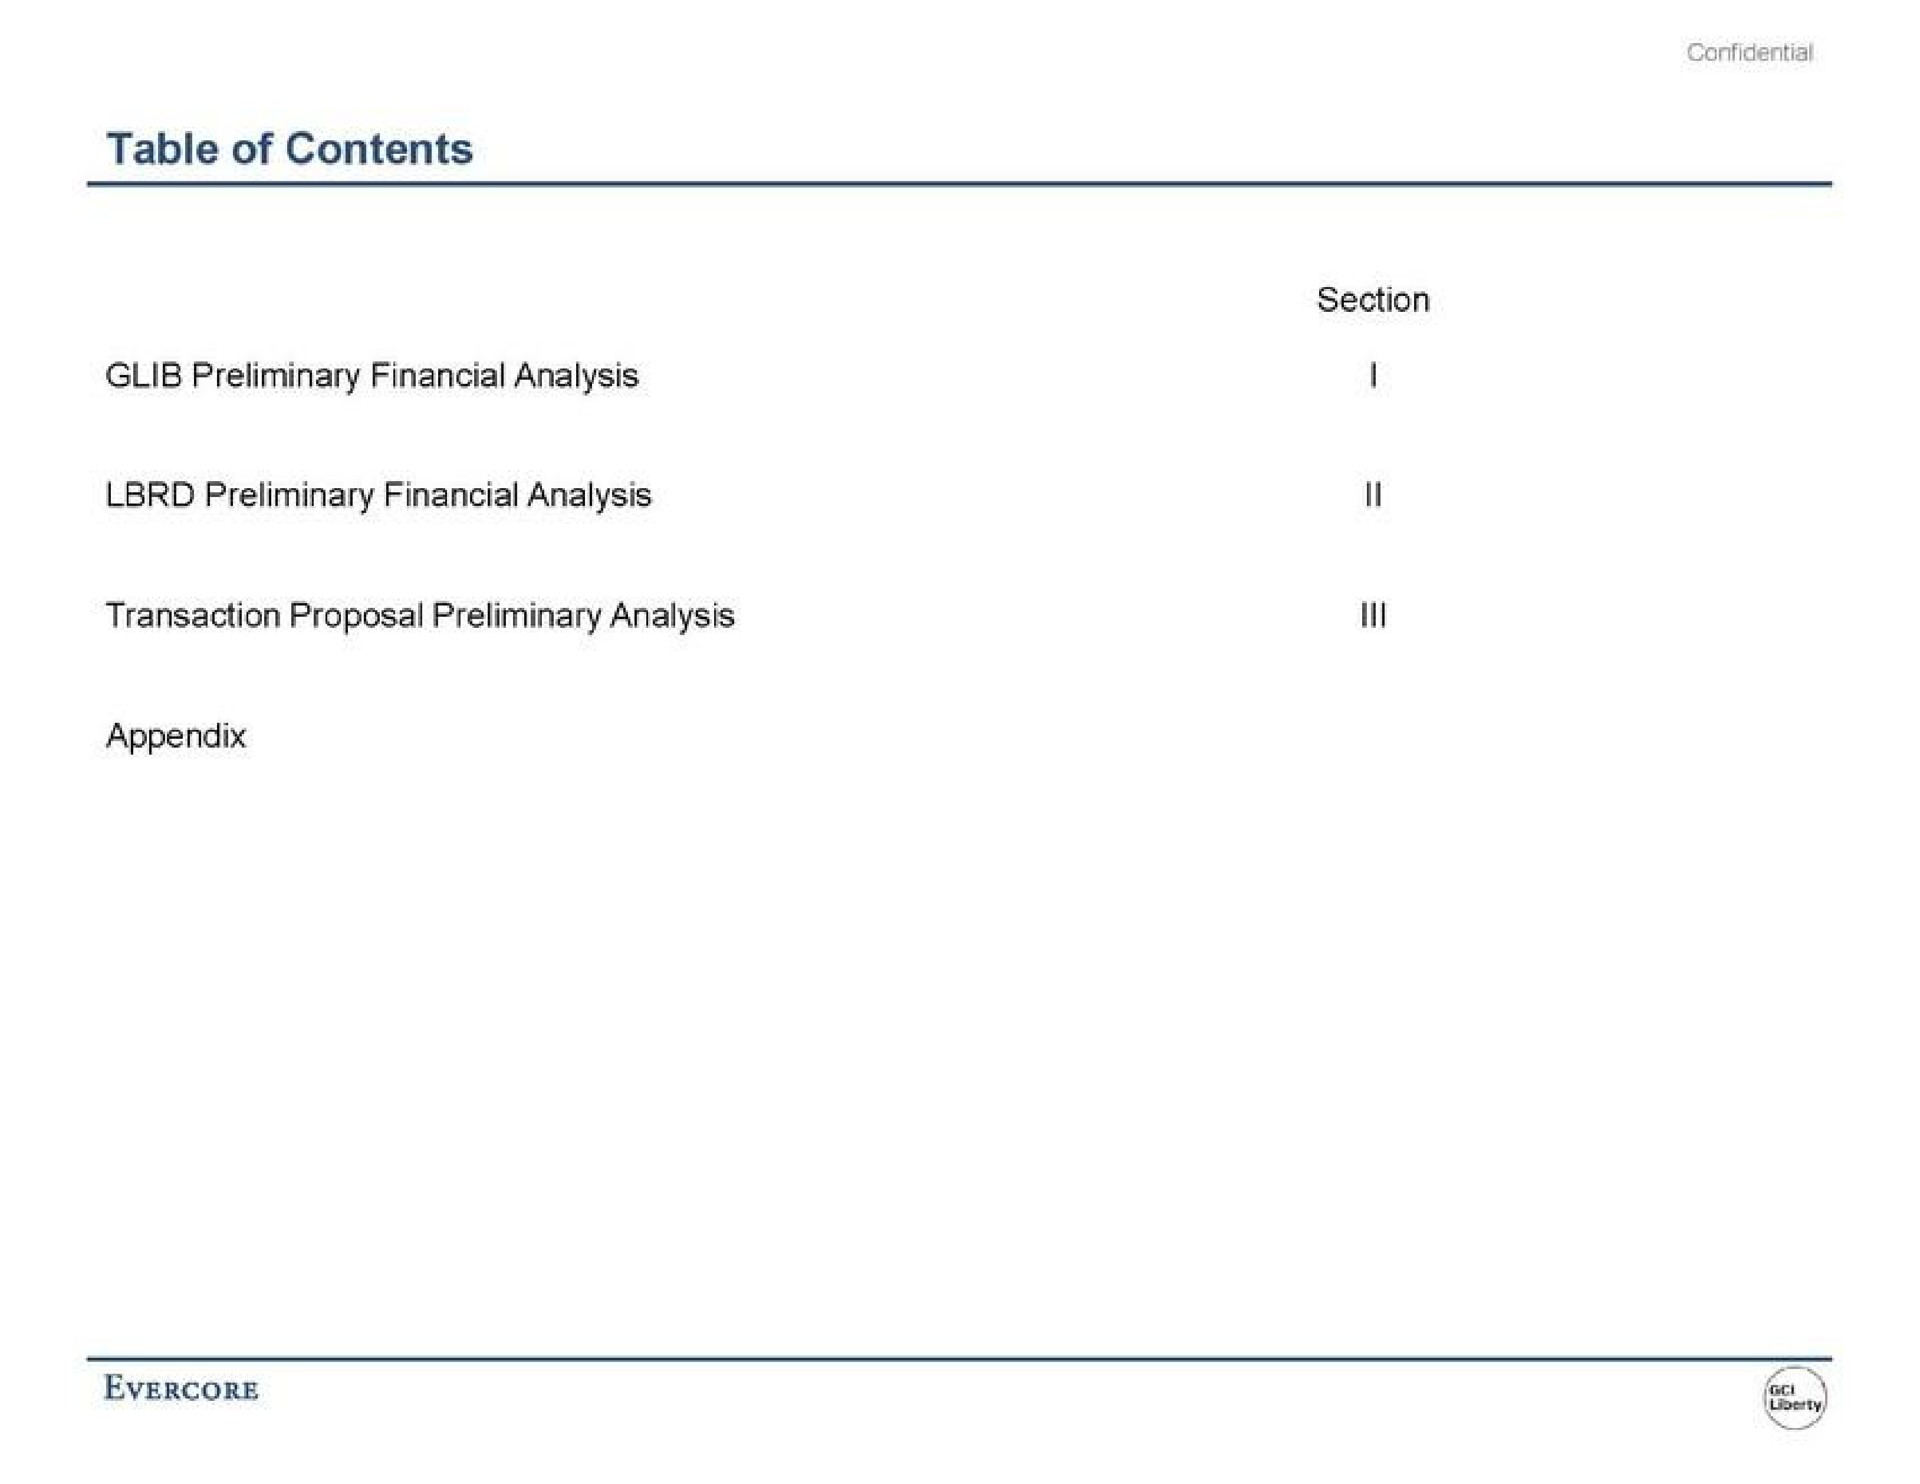 section table of contents glib preliminary financial analysis preliminary financial analysis transaction proposal preliminary analysis | Evercore